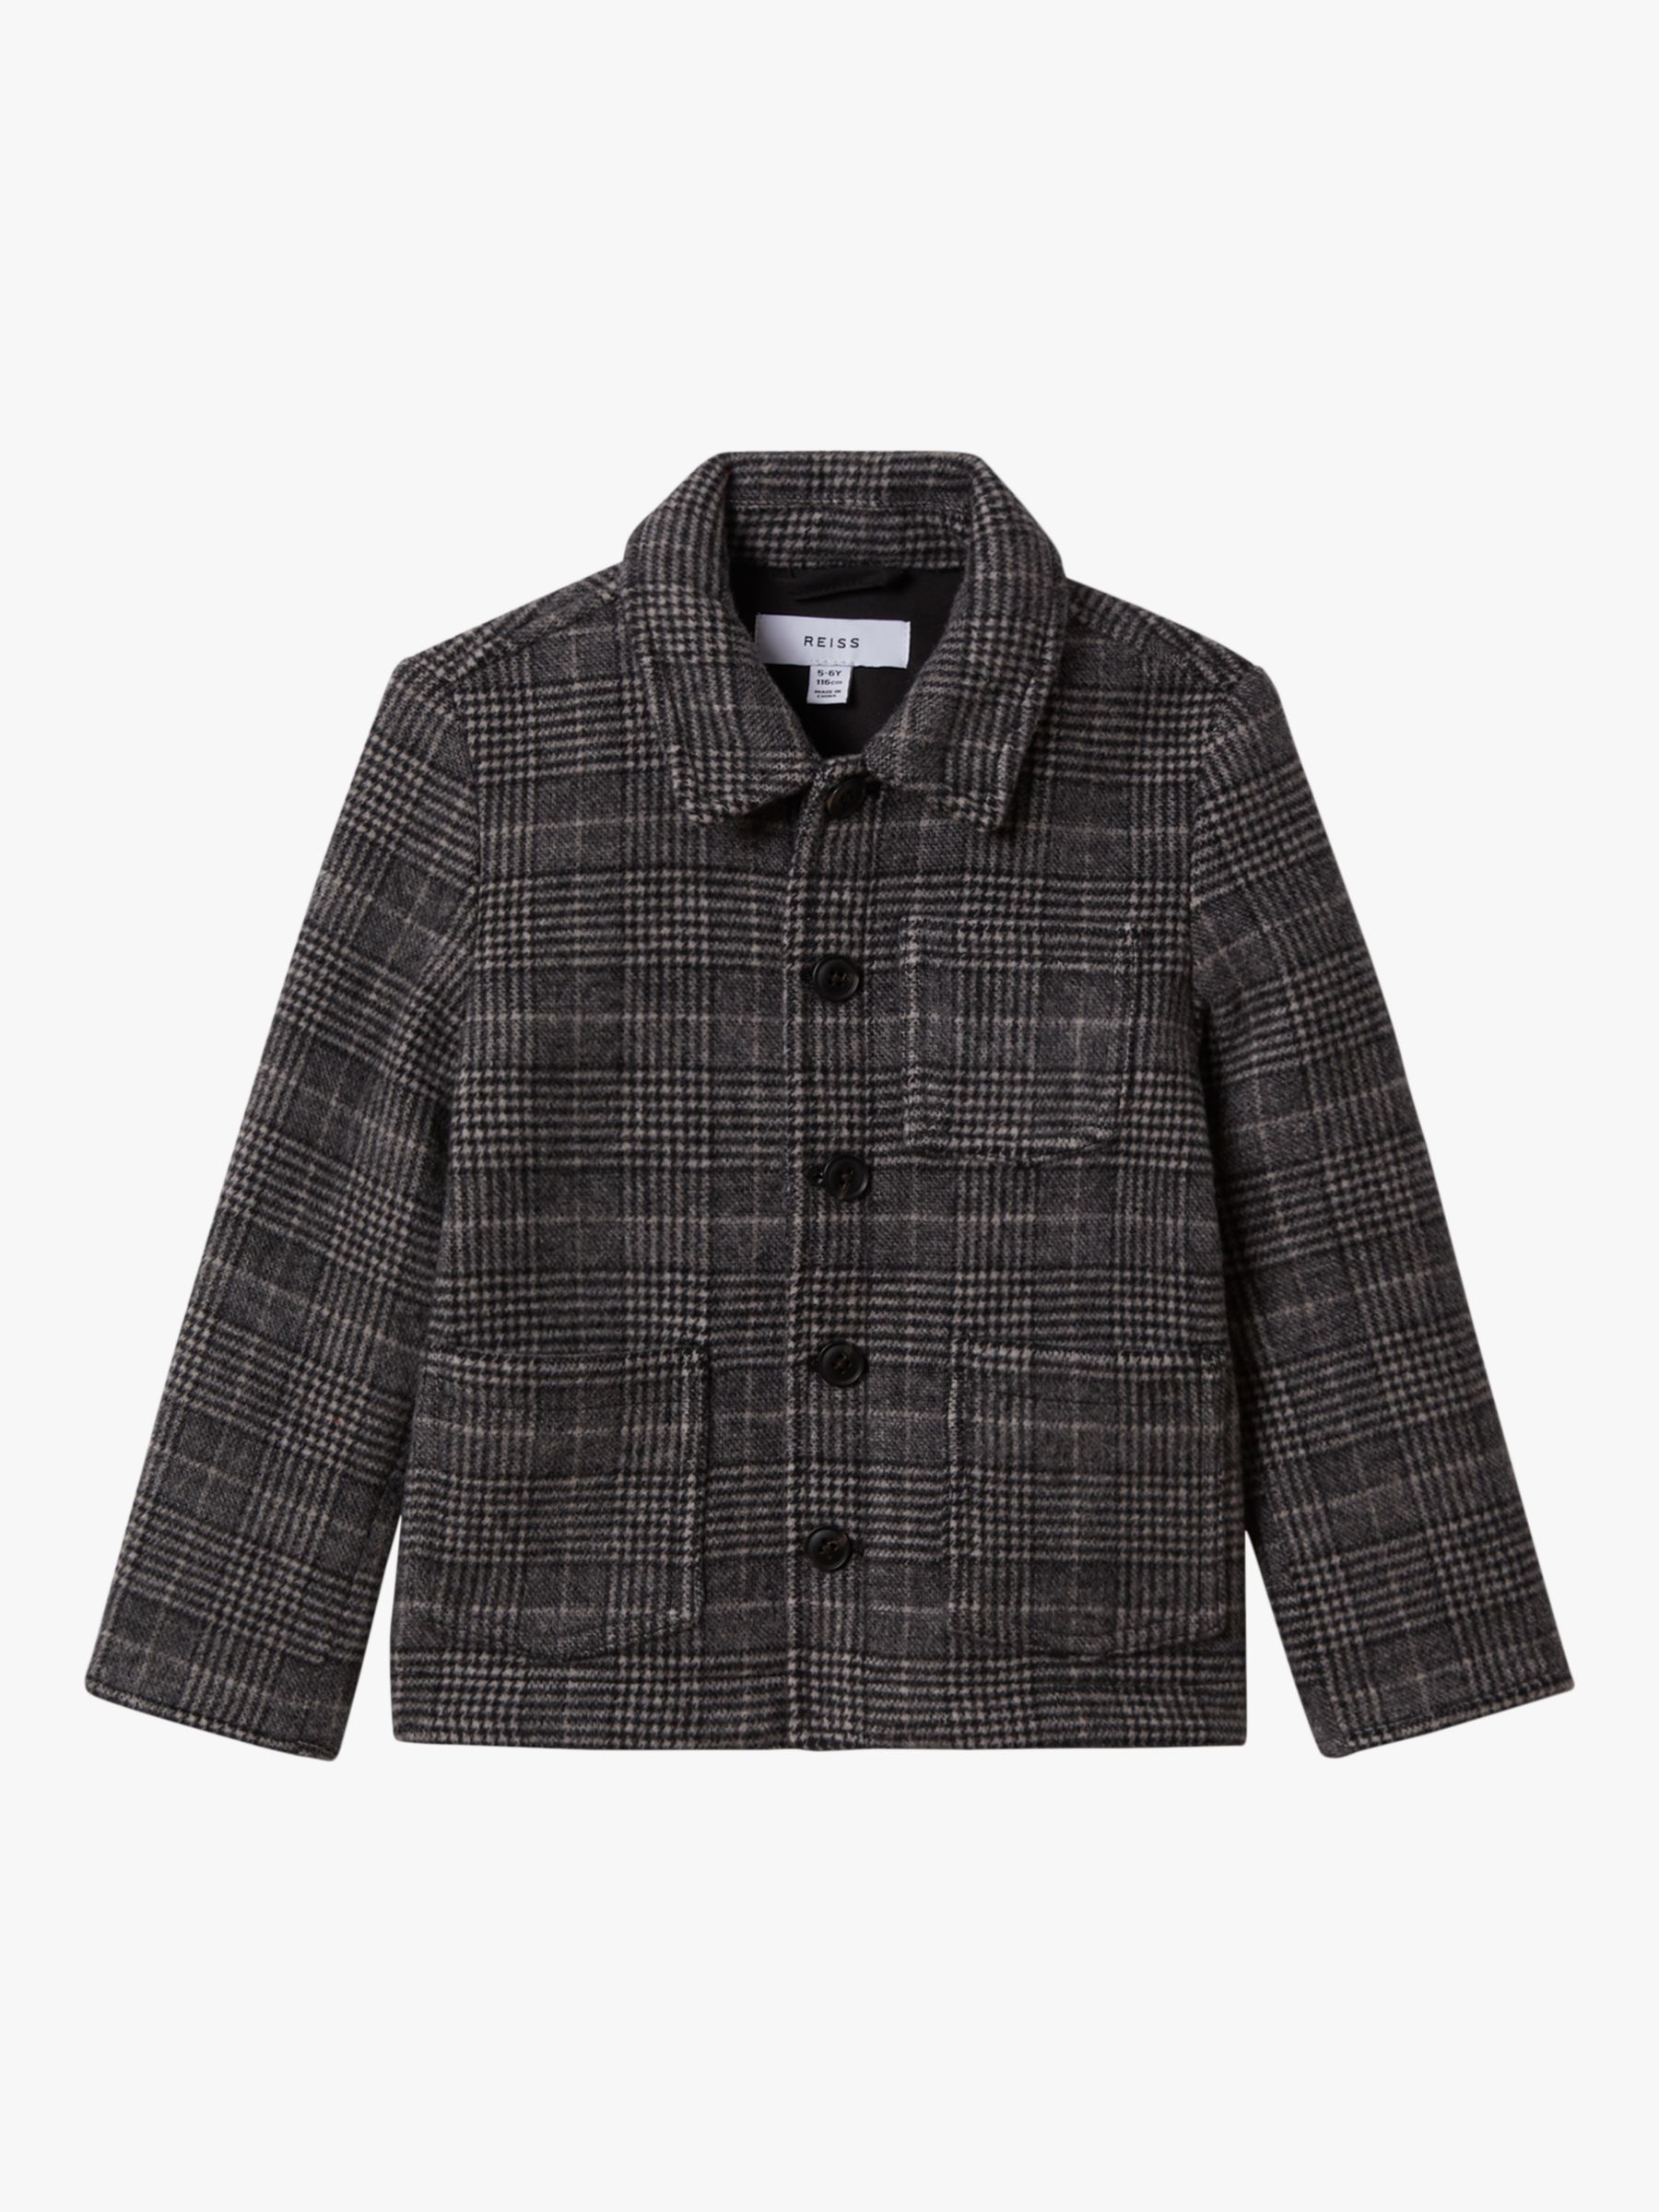 Reiss Kids' Covert Check Button Through Overshirt, Charcoal, 8-9 years